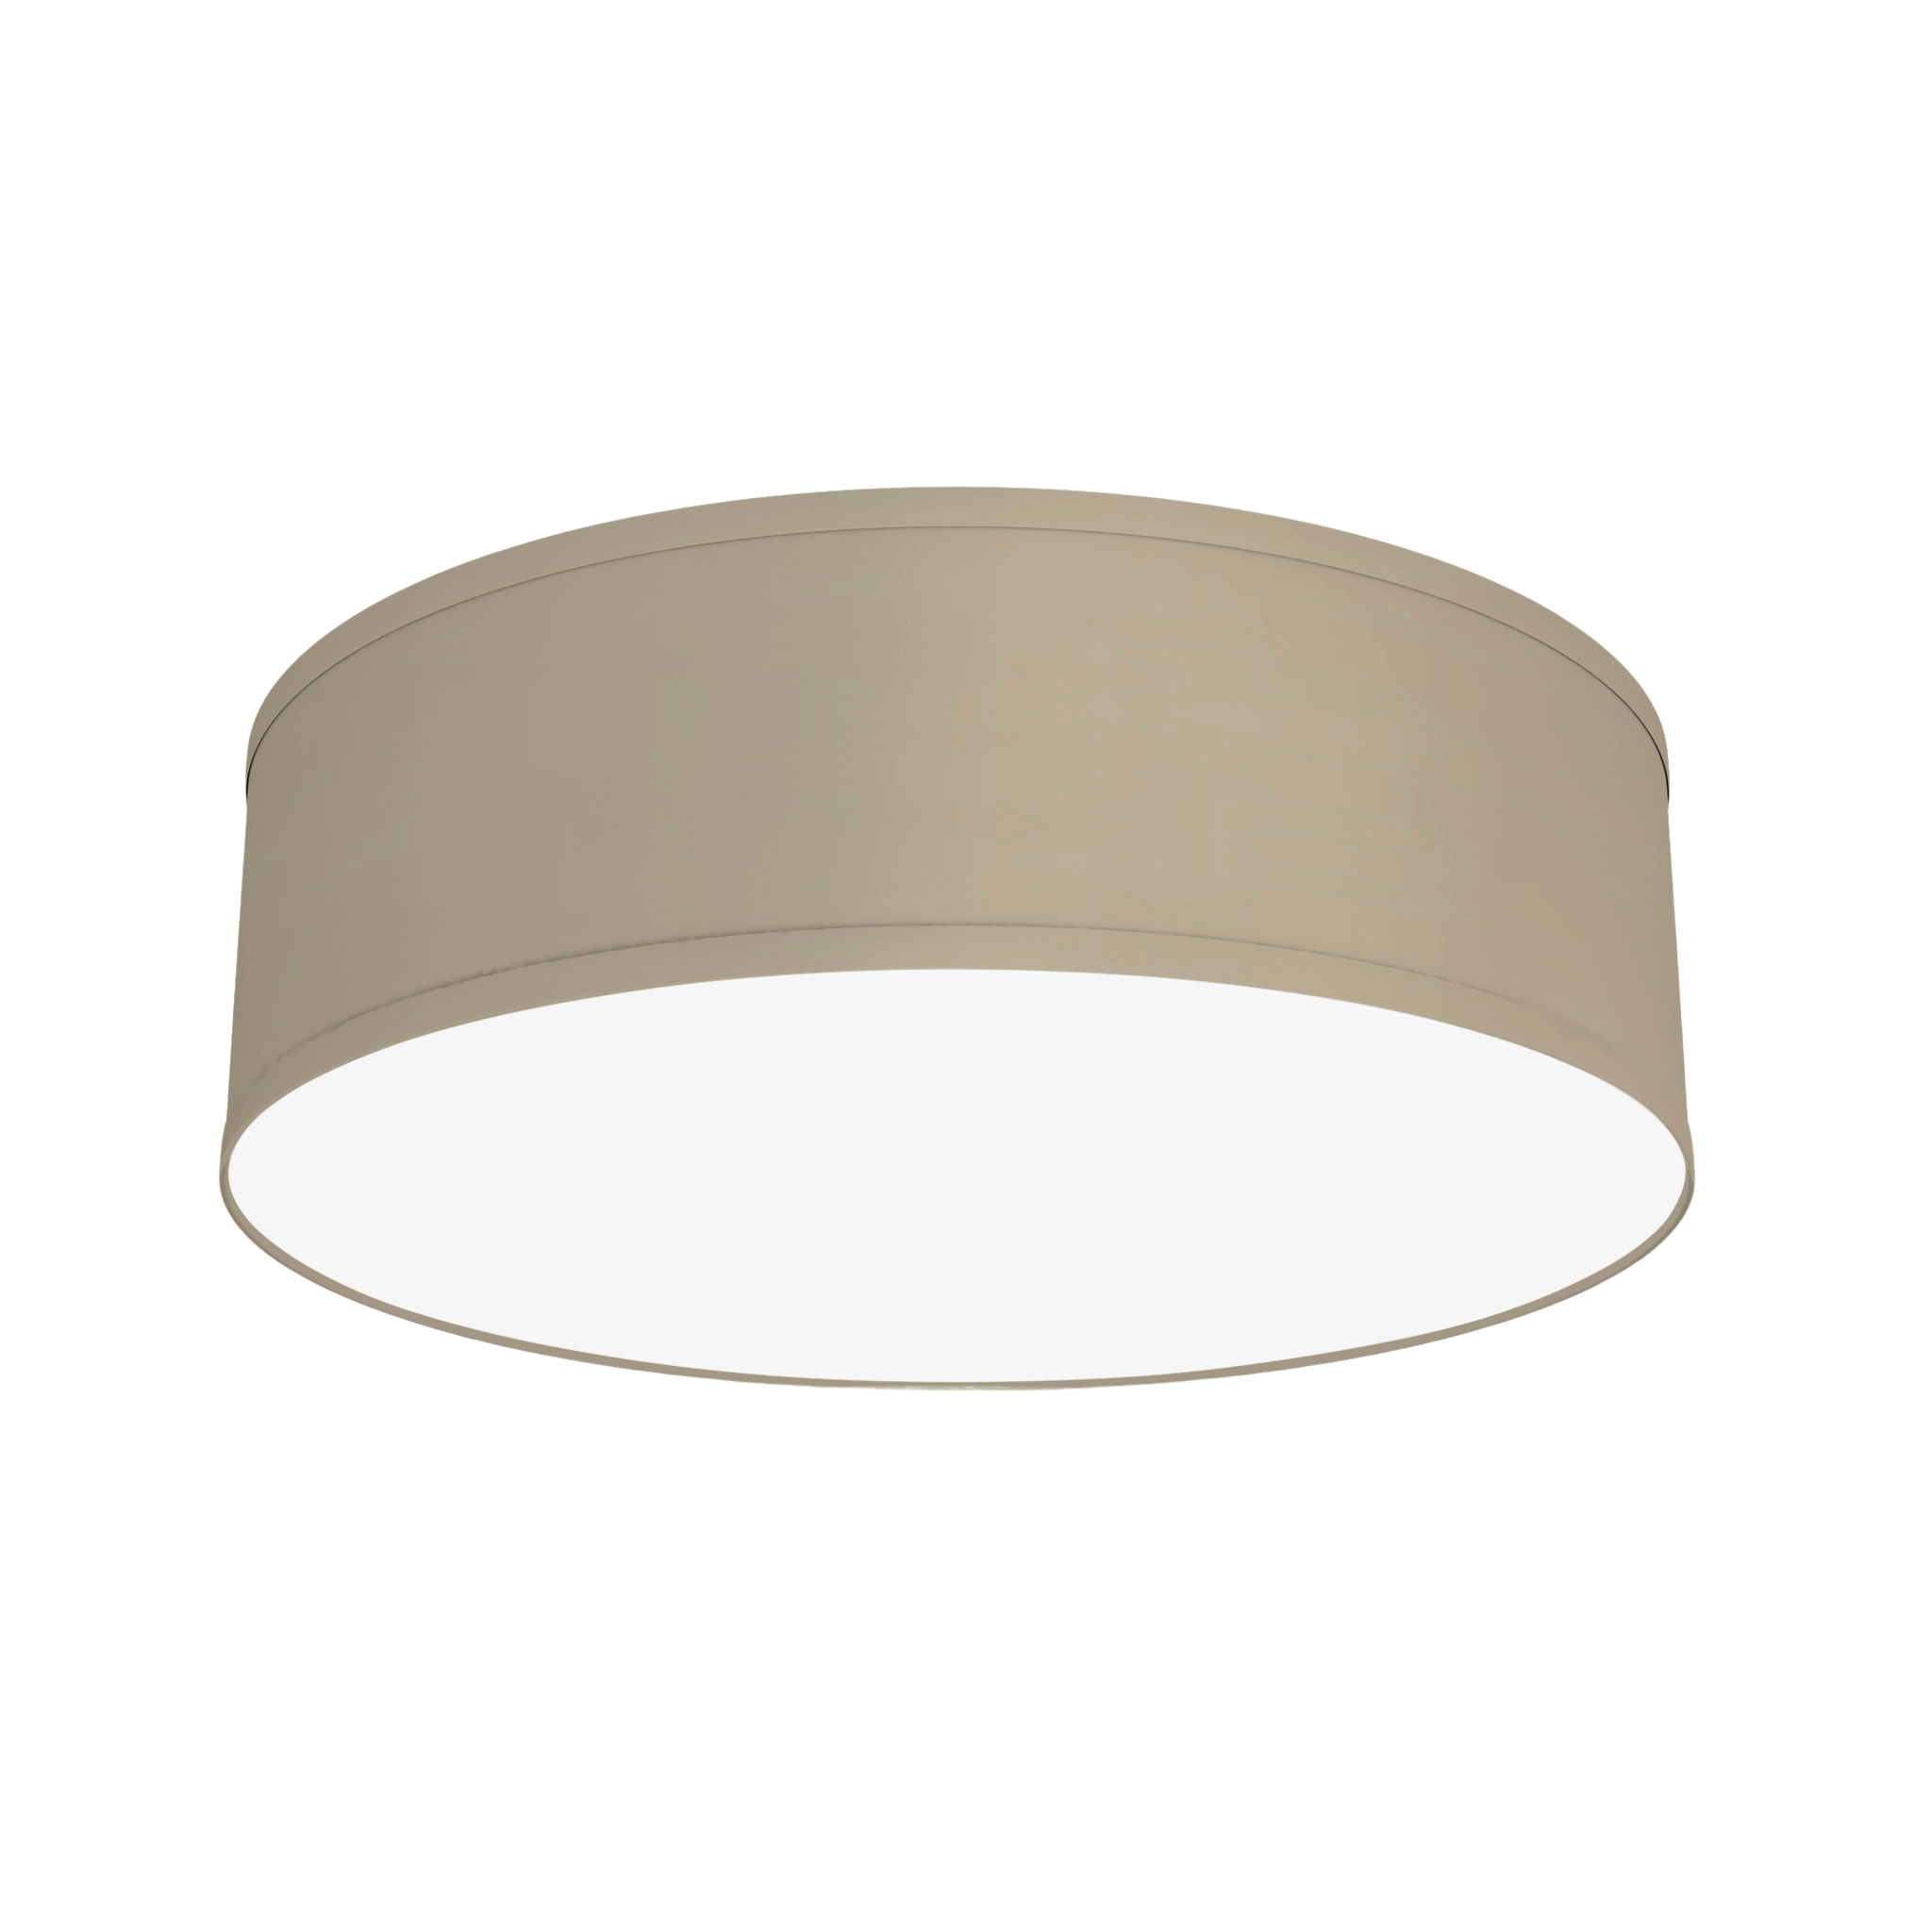 The Amy Semi Flush Mount from Seascape Fixtures in linen, tan color.